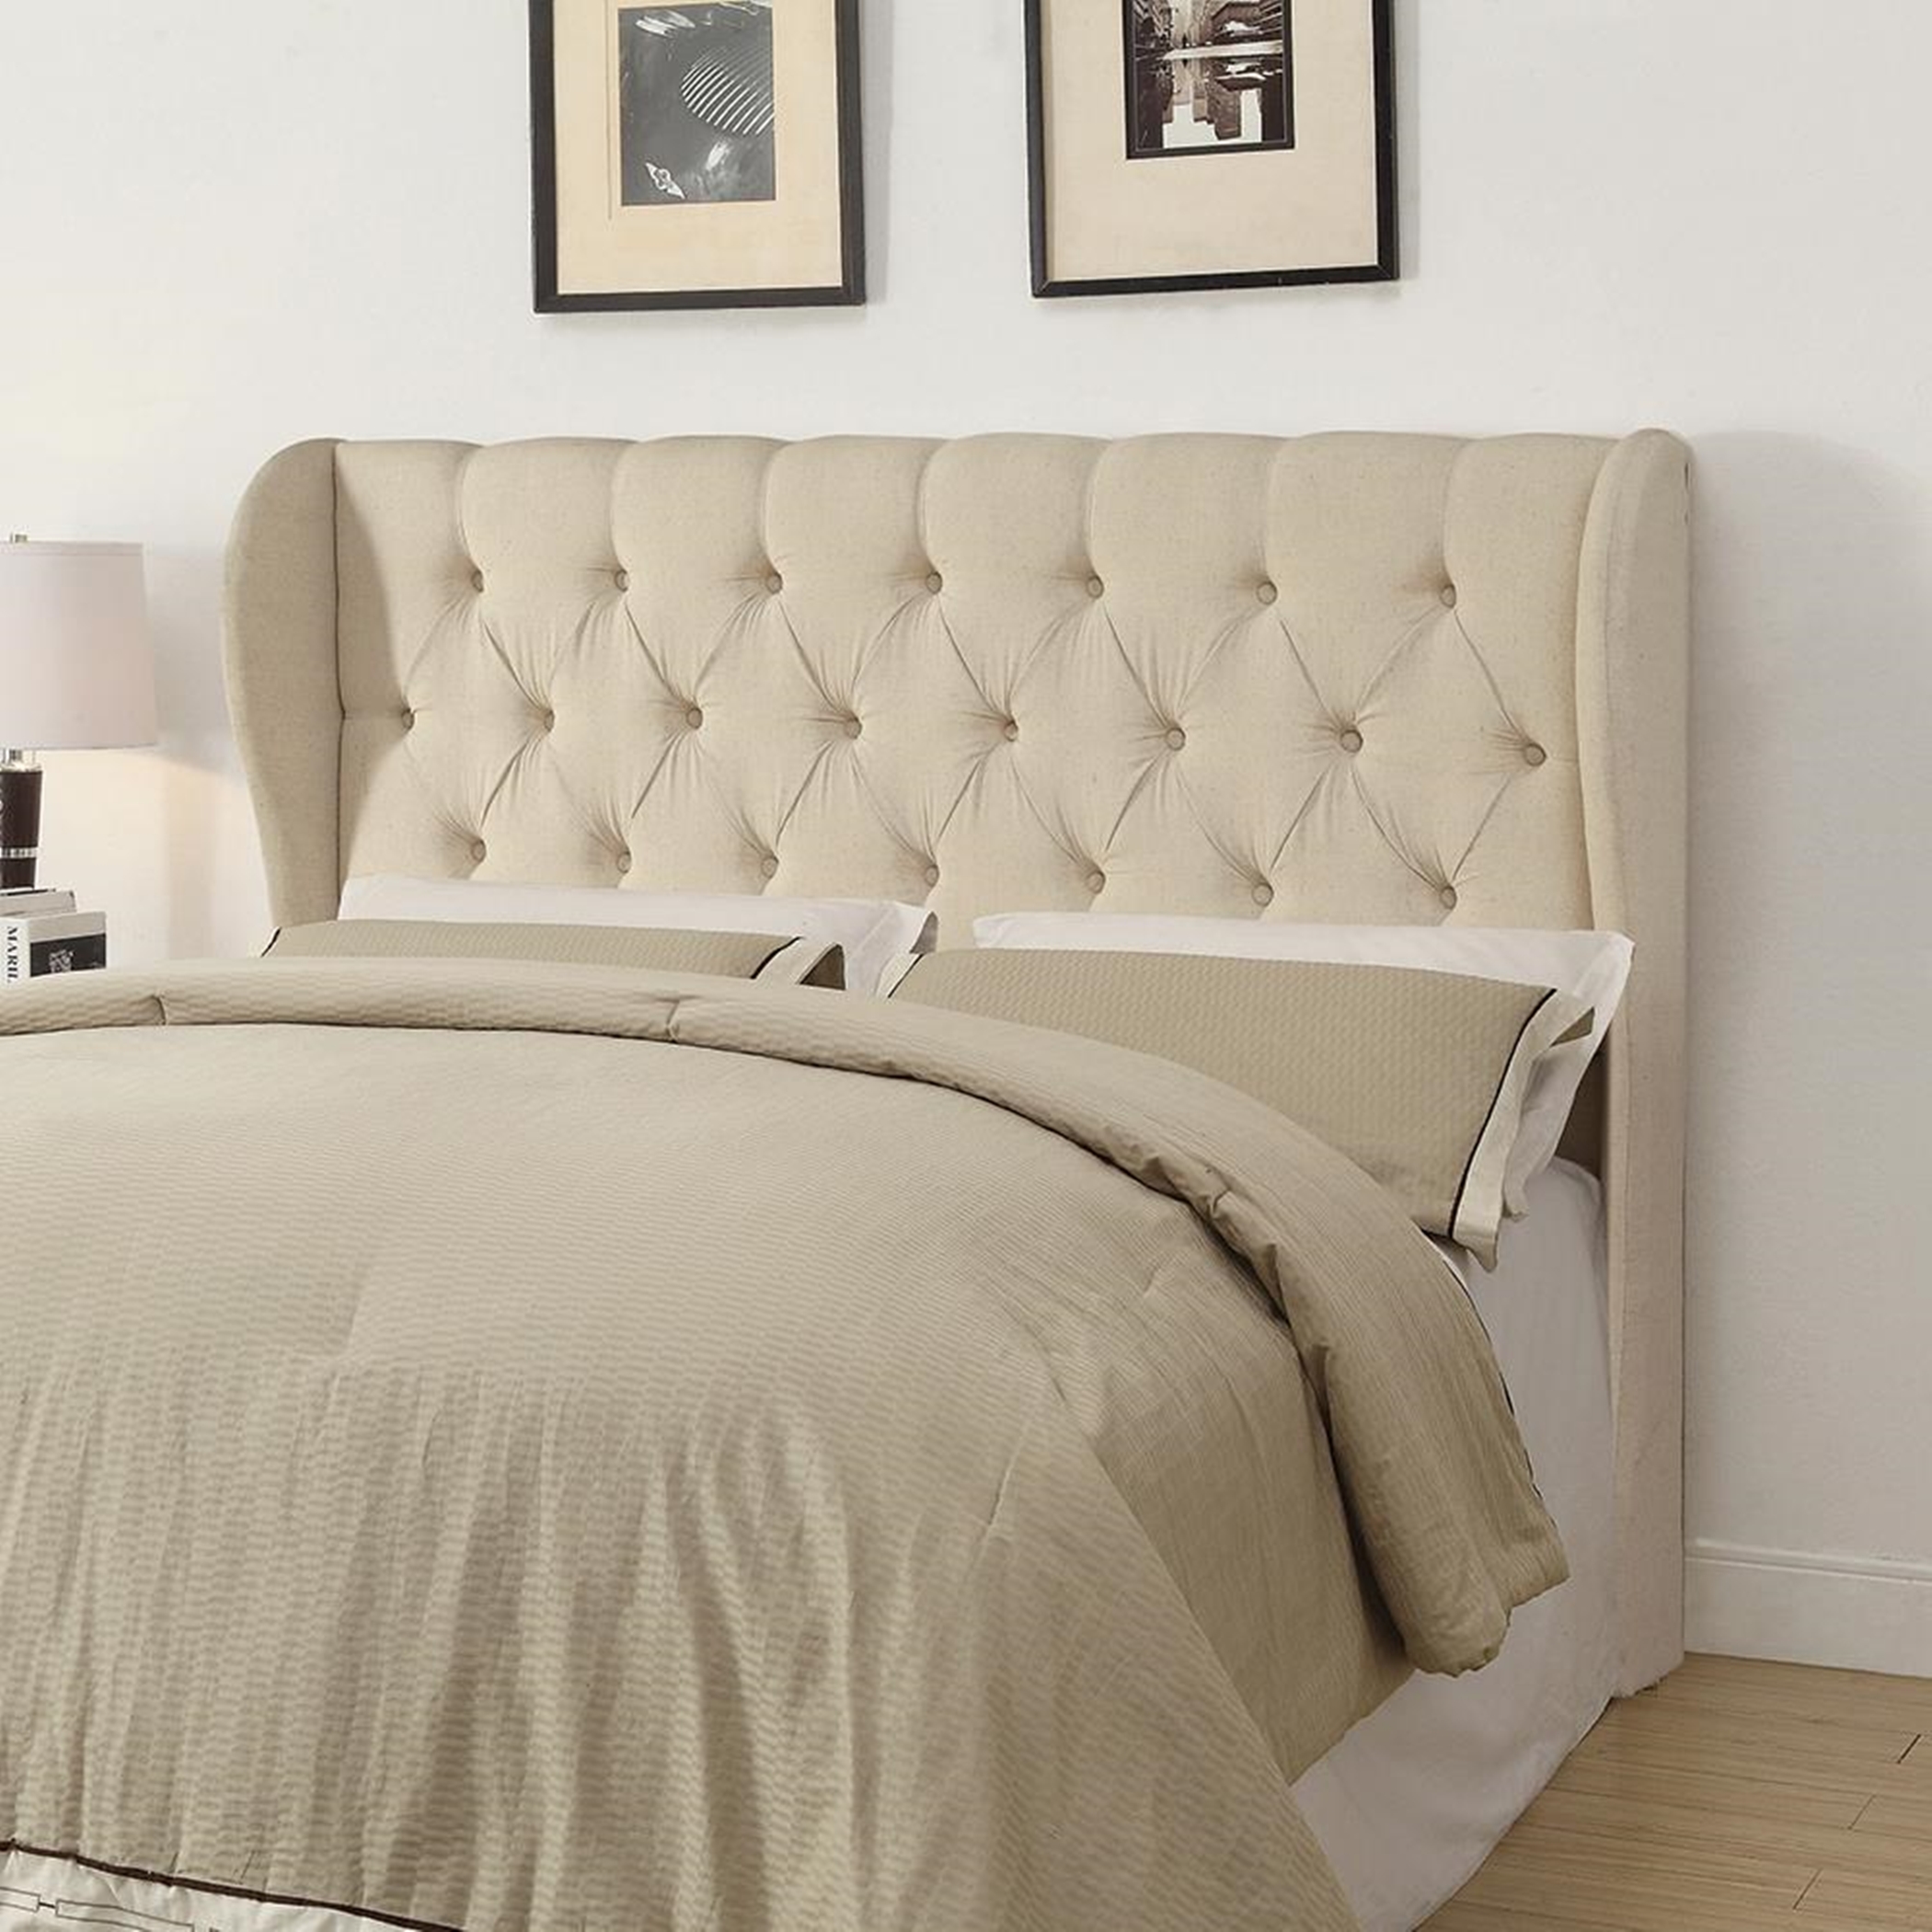 Murietta Beige Upholstered King Headboard - Click Image to Close